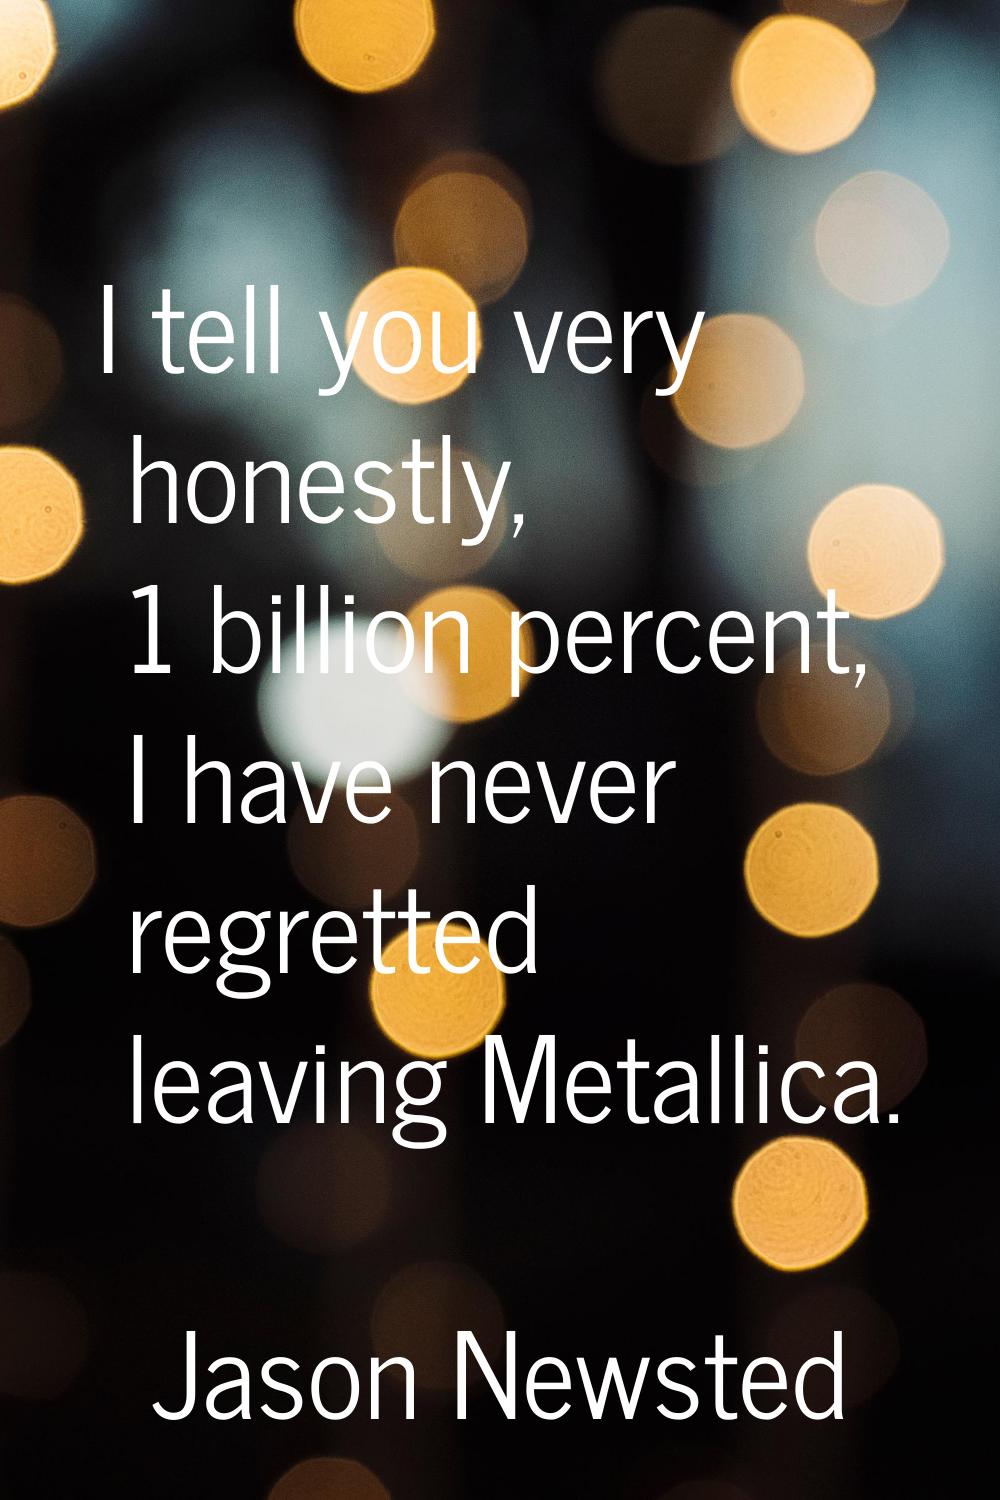 I tell you very honestly, 1 billion percent, I have never regretted leaving Metallica.